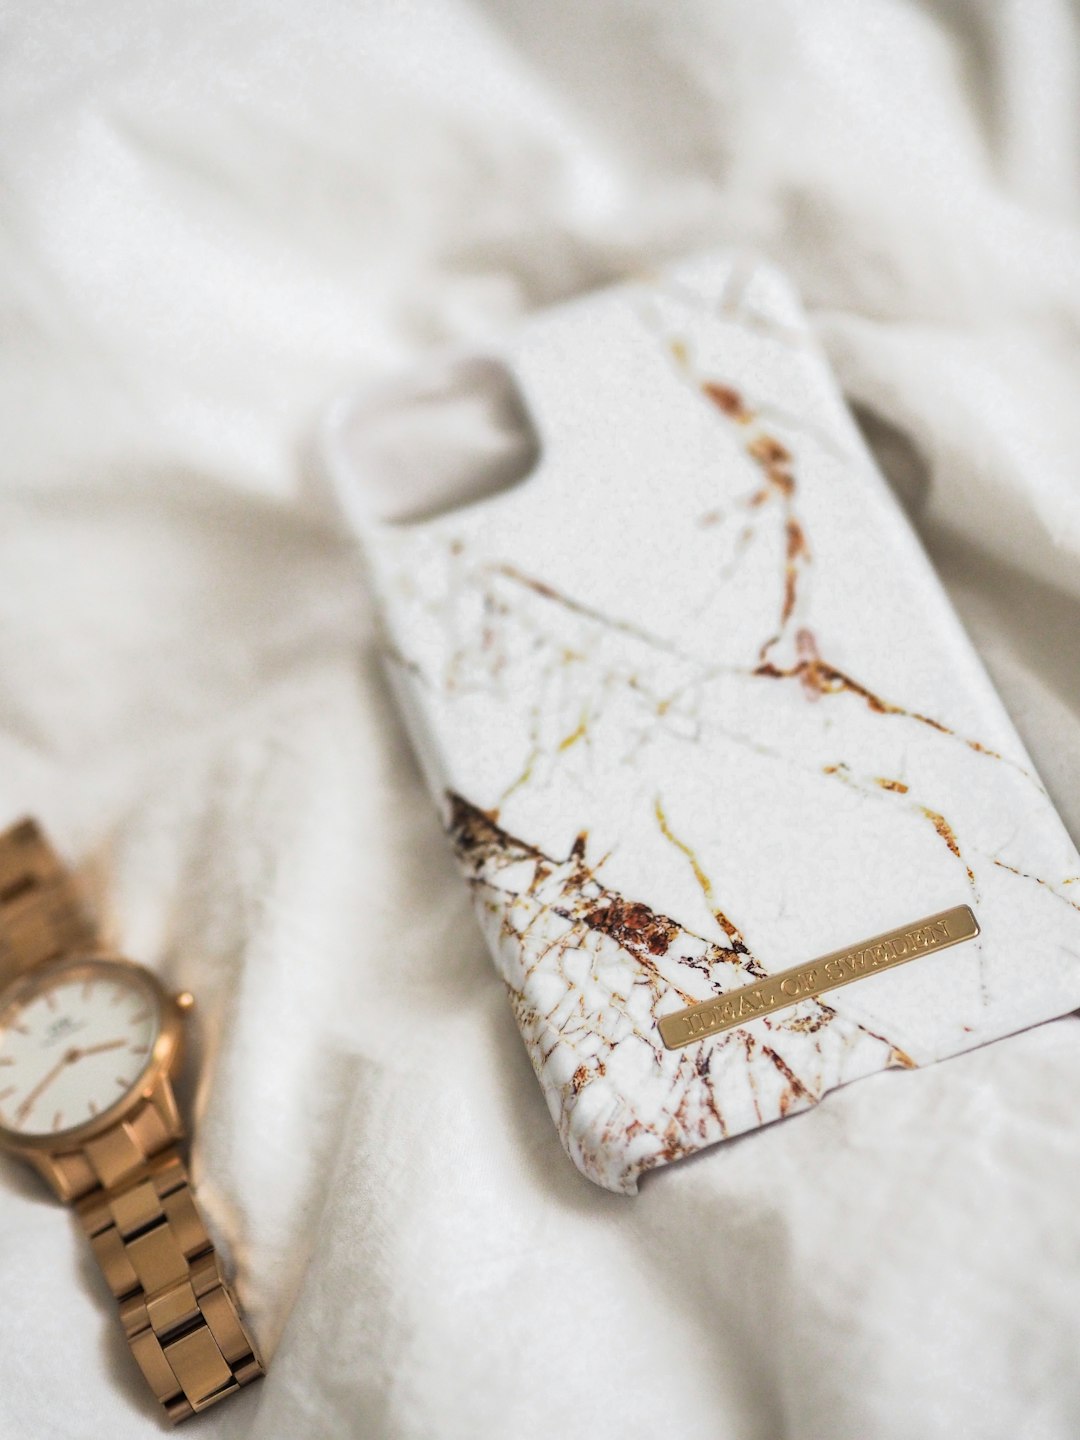 white and black iphone case on white textile